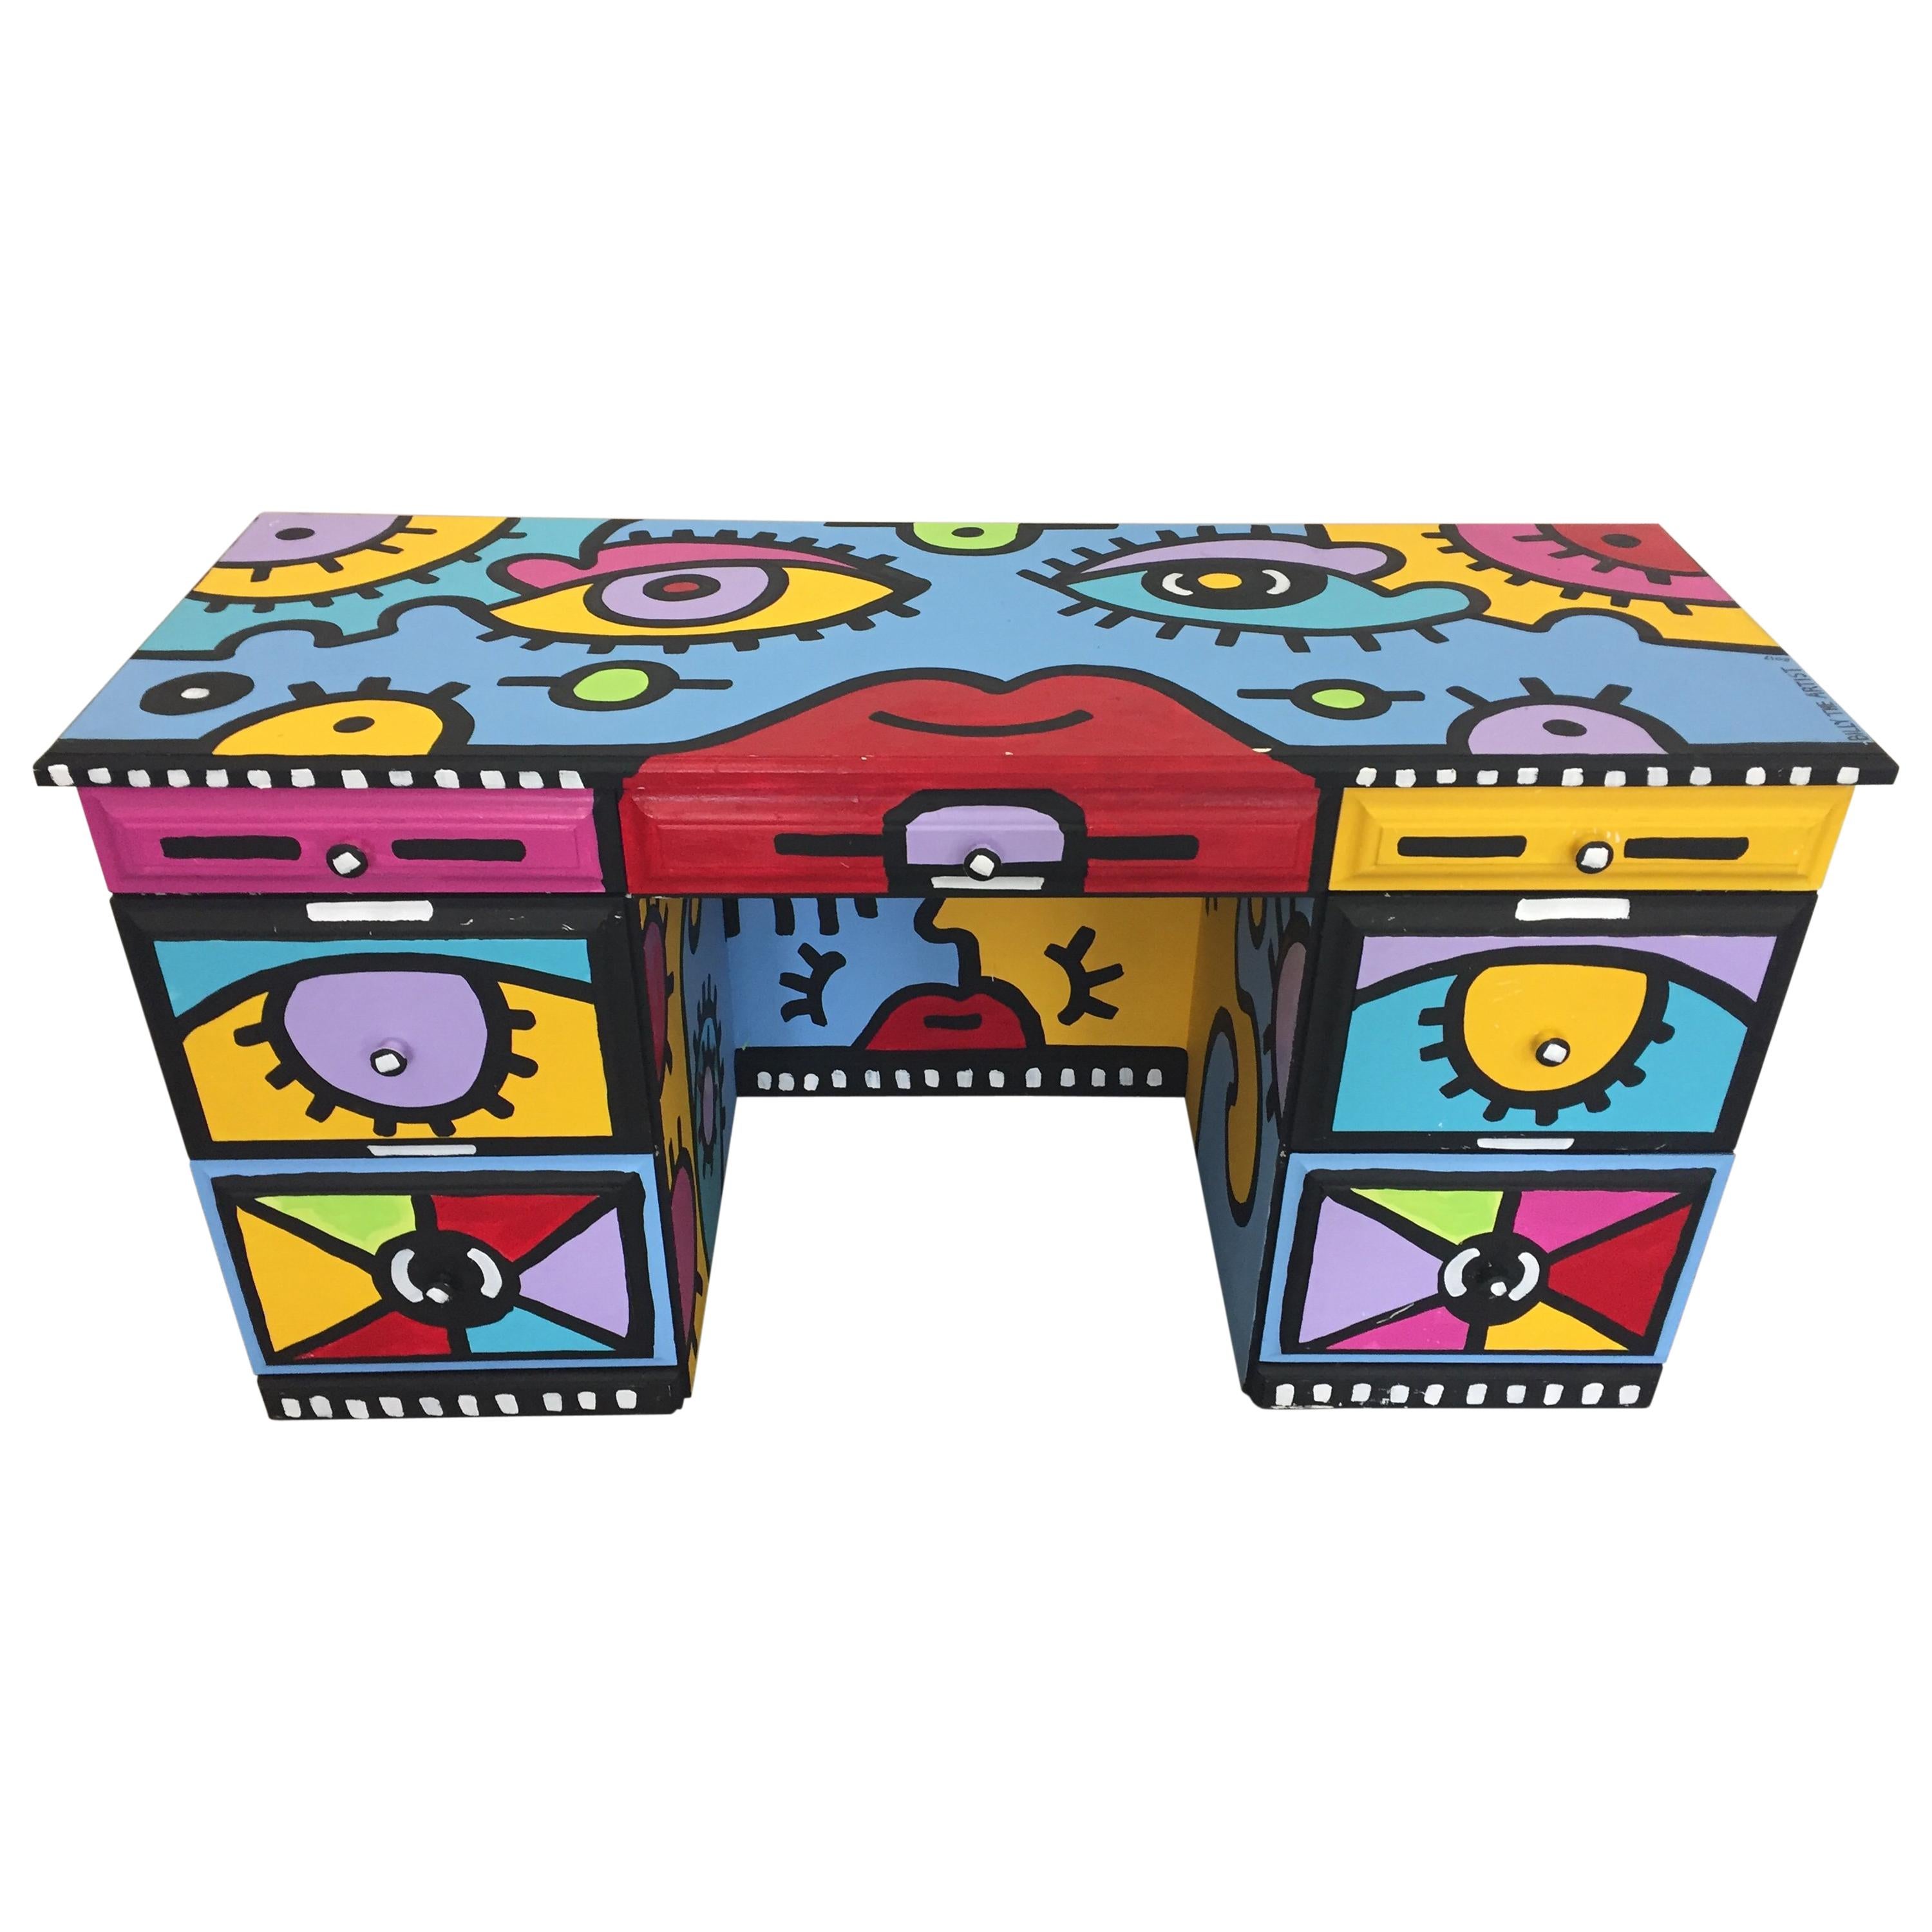 Peter Maxish One of a Kind Bold Painted Desk by Billy the Artist